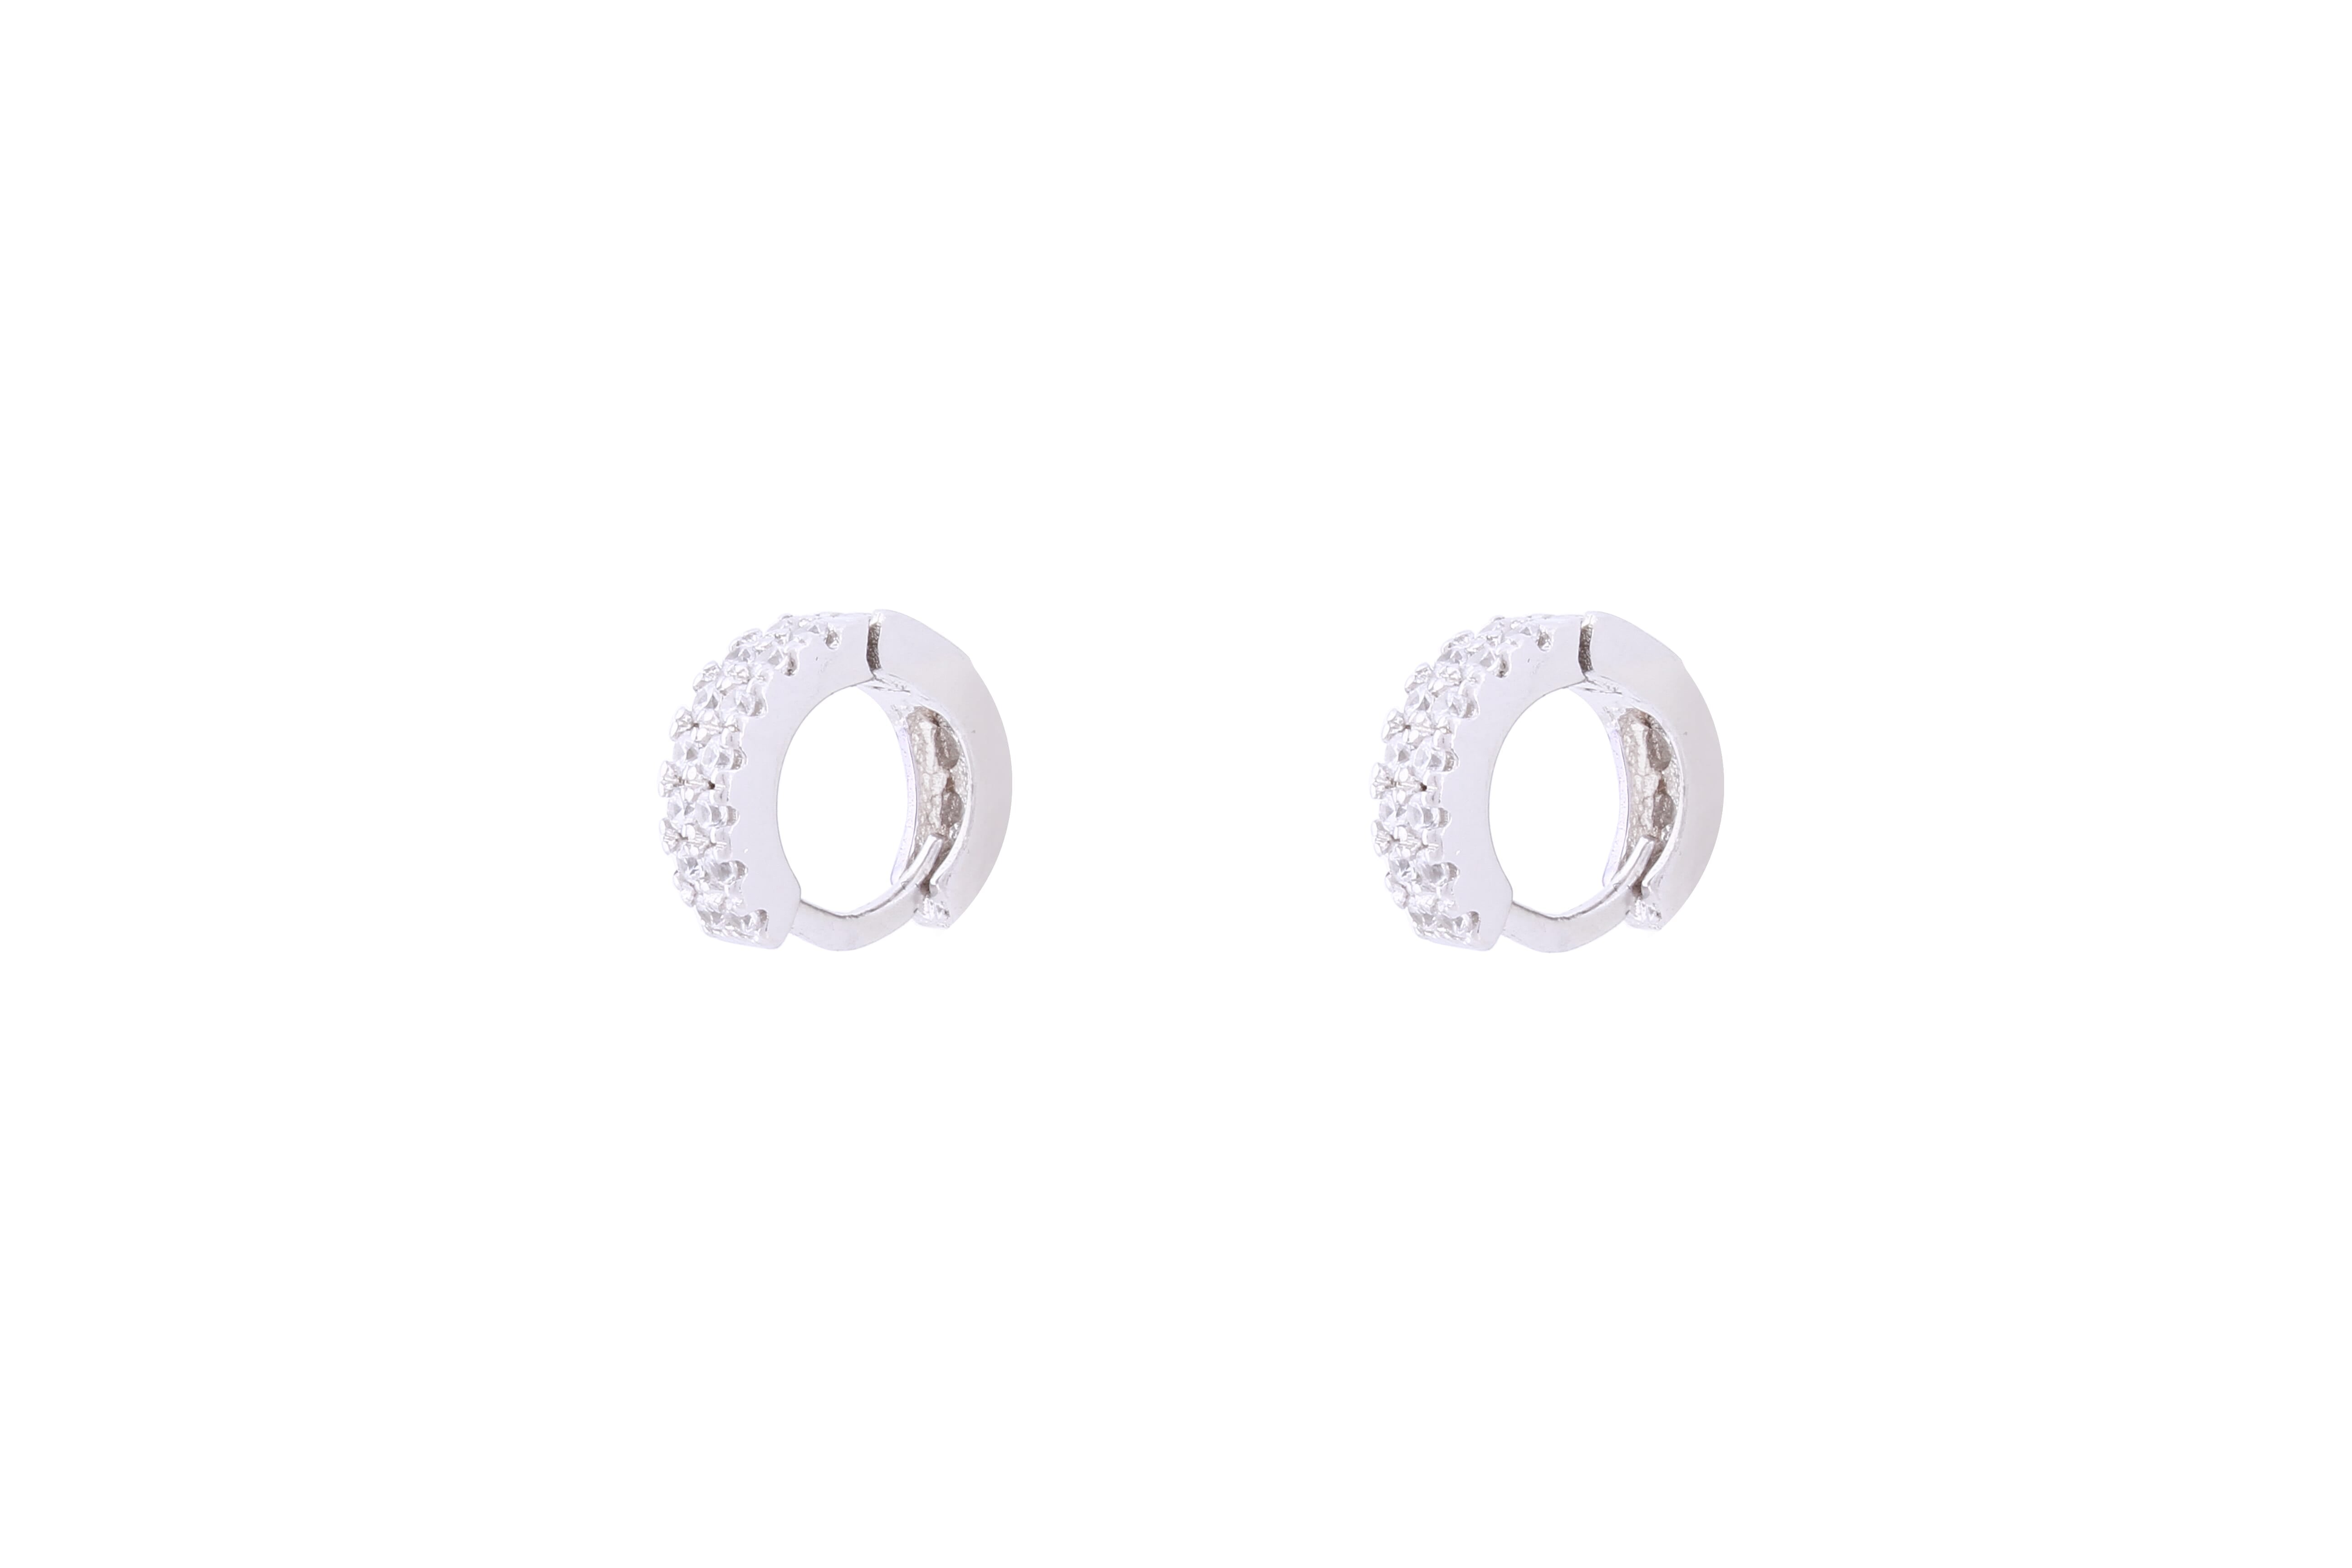 Asfour Crystal Hoop Earrings inlaid  With Round Zircon Stones In 925 Sterling Siver ER0409